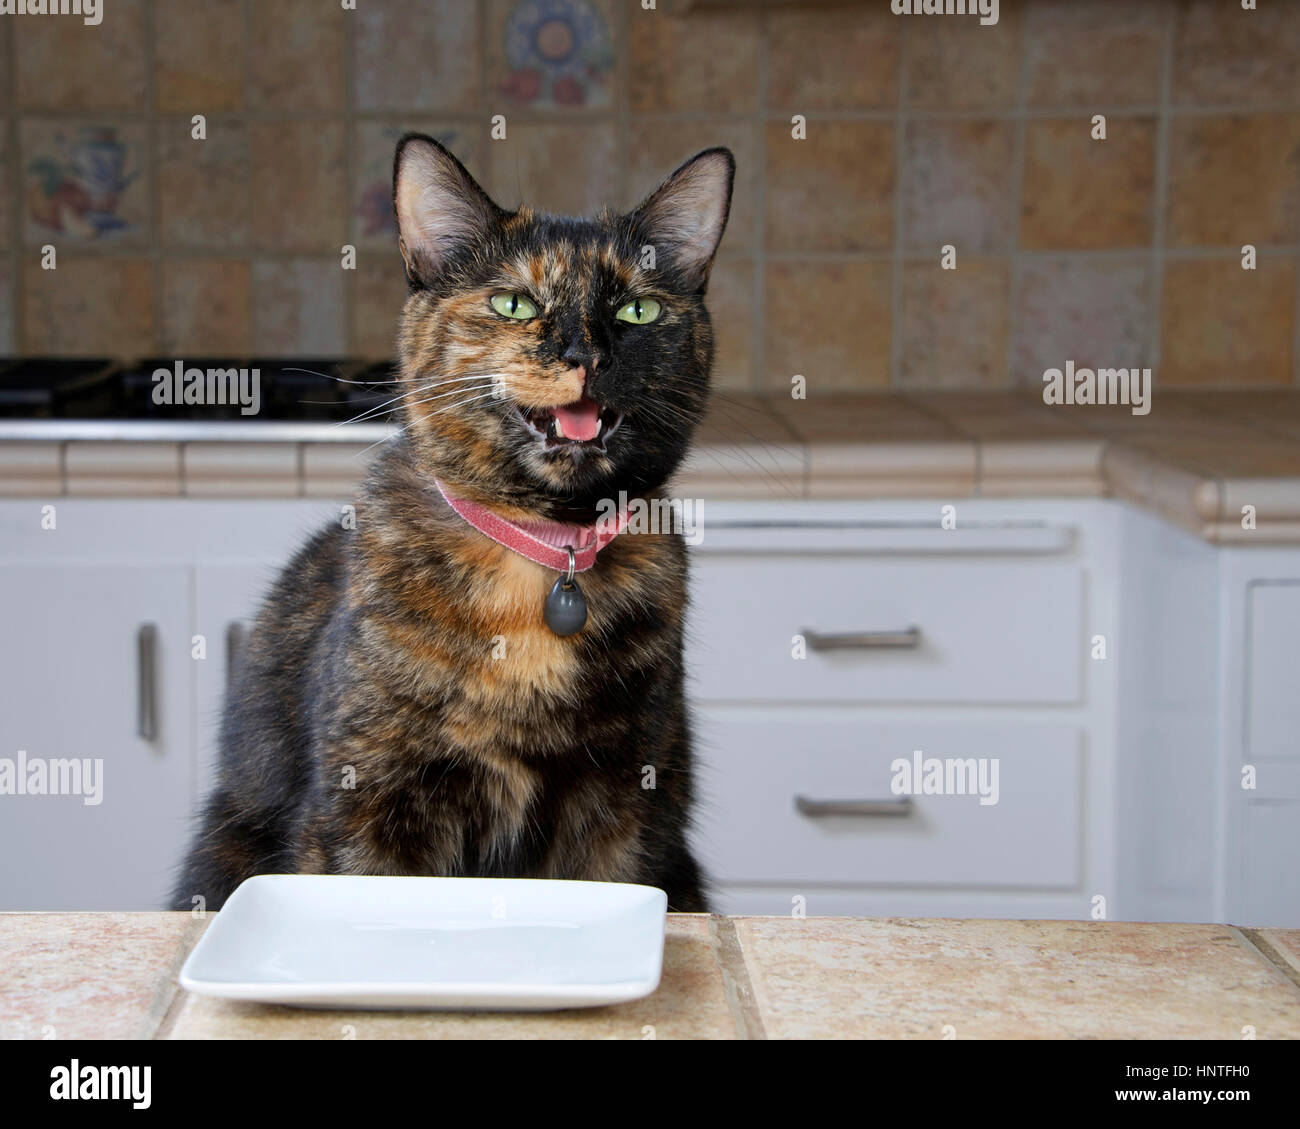 Tortoiseshell or Tortie Tabby cat sitting at the counter with an empty plate waiting for food. Mouth open looks like talking. Stock Photo